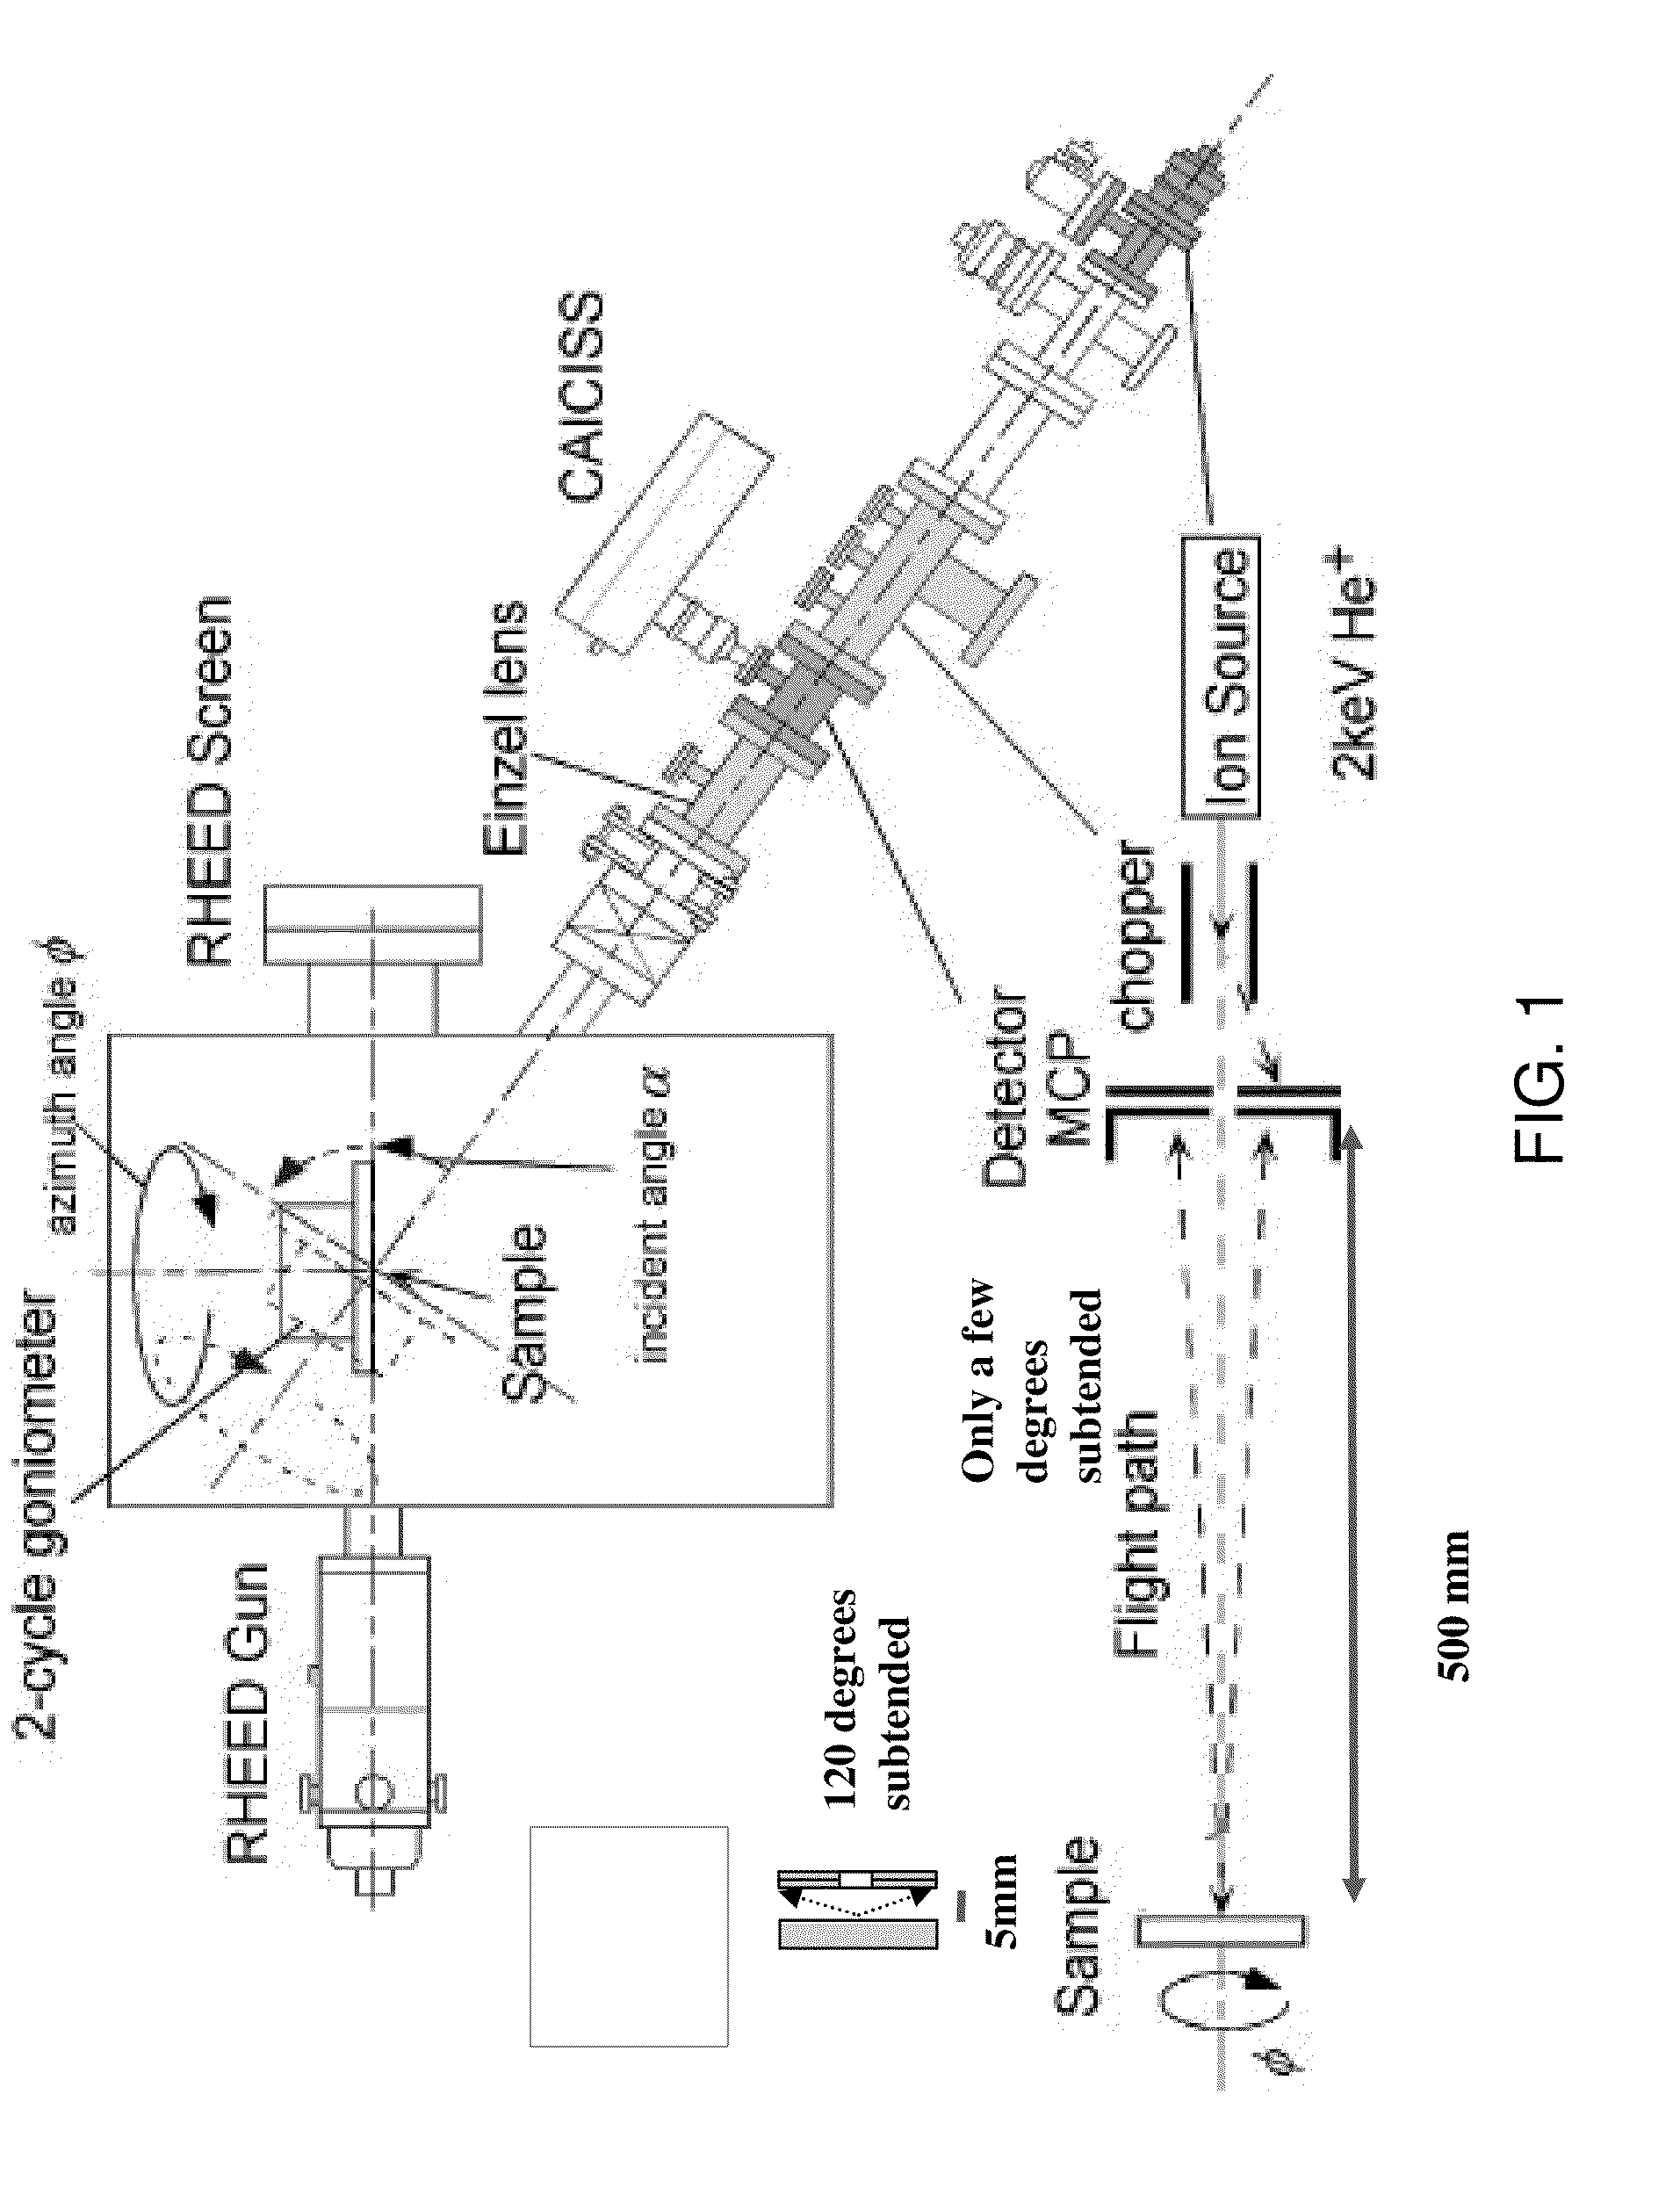 Time-of-flight mass spectrometry of surfaces